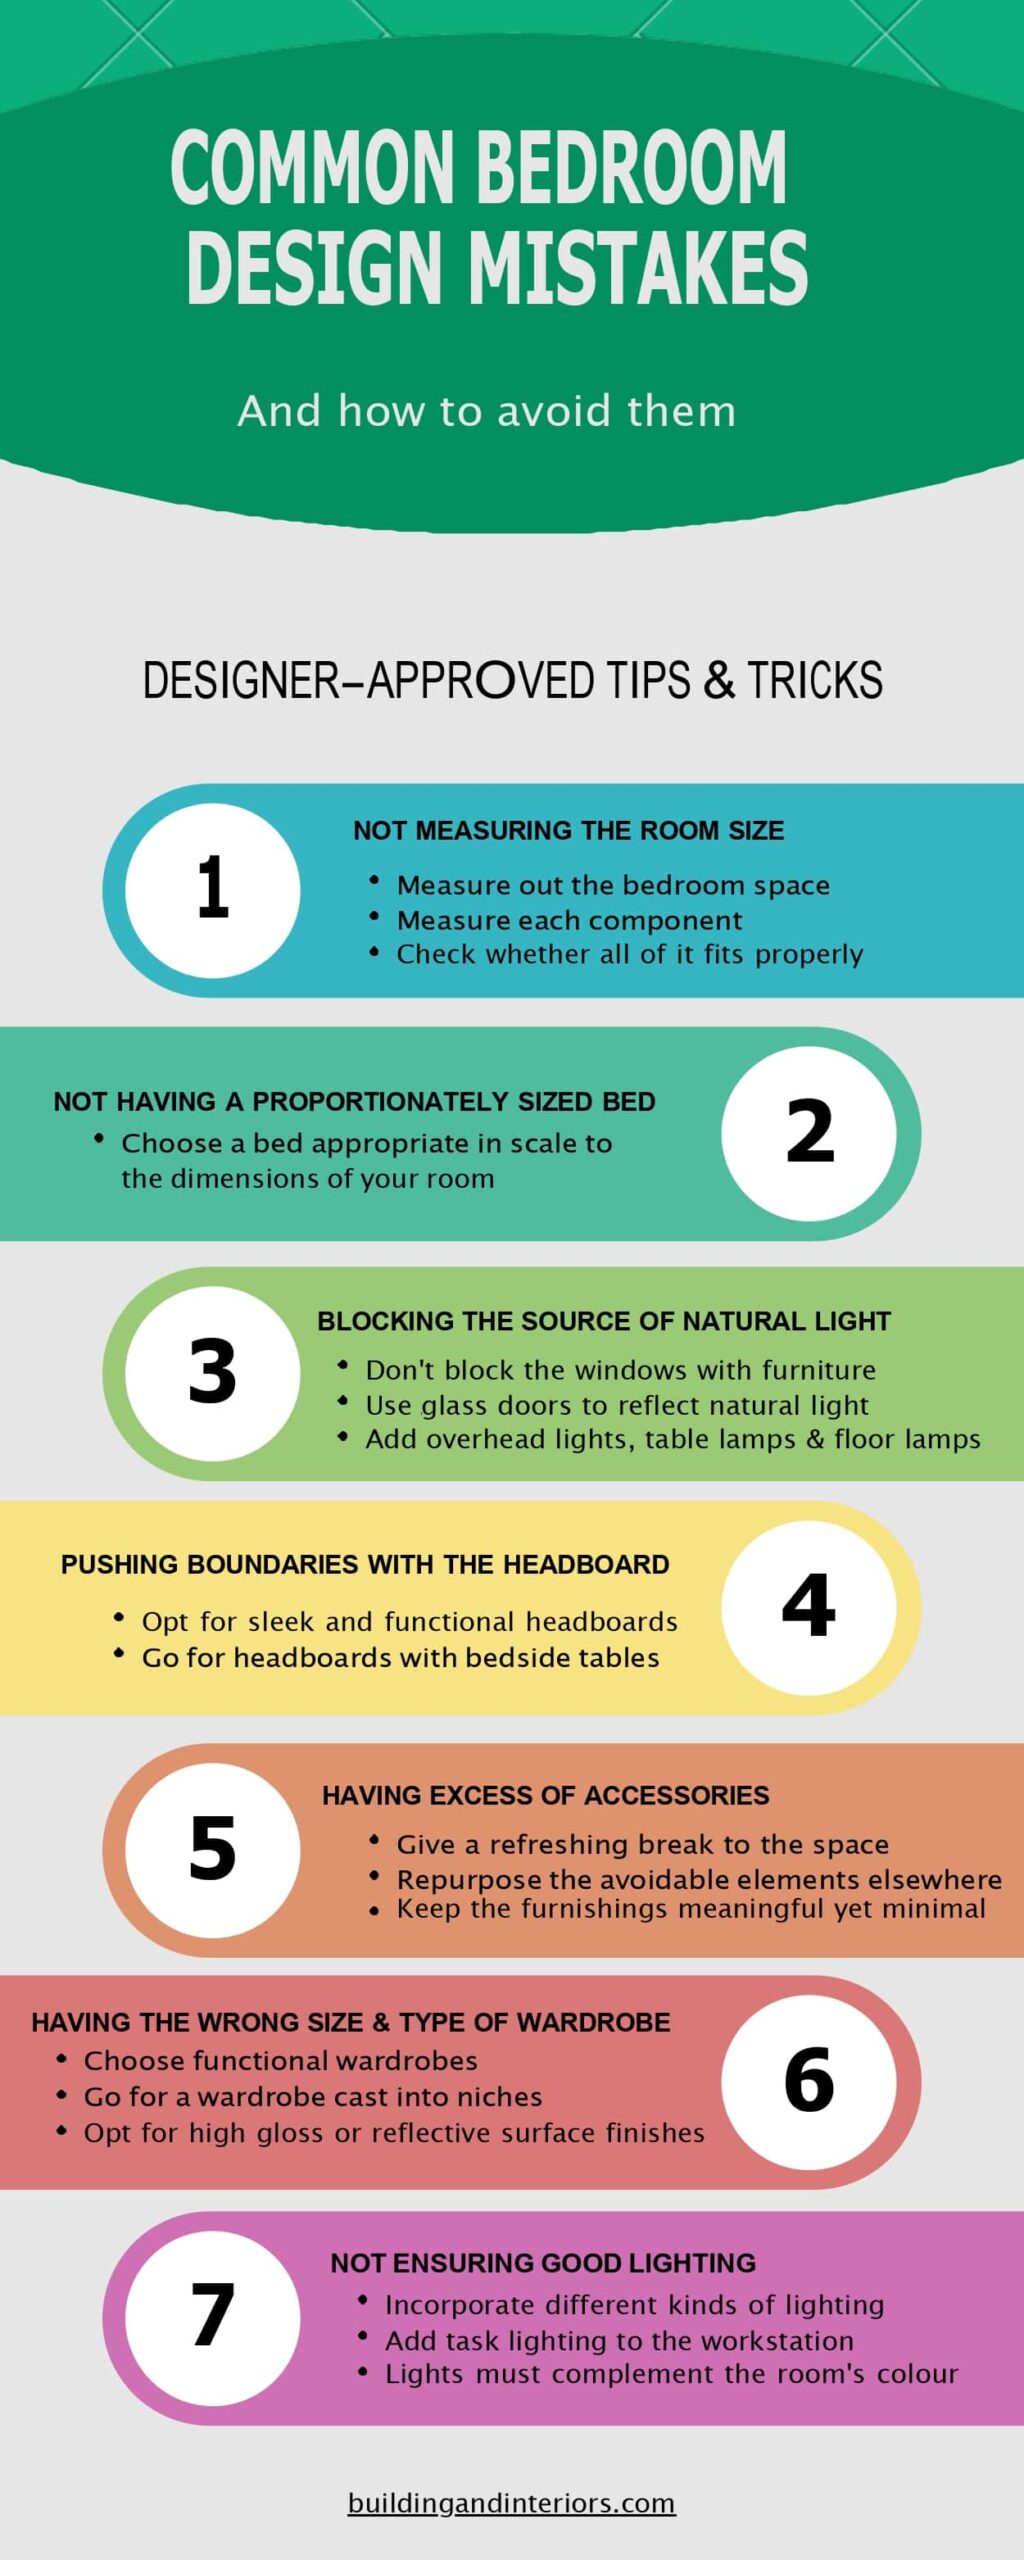 an infographic enlisting the most common bedroom design mistakes and how to avoid them